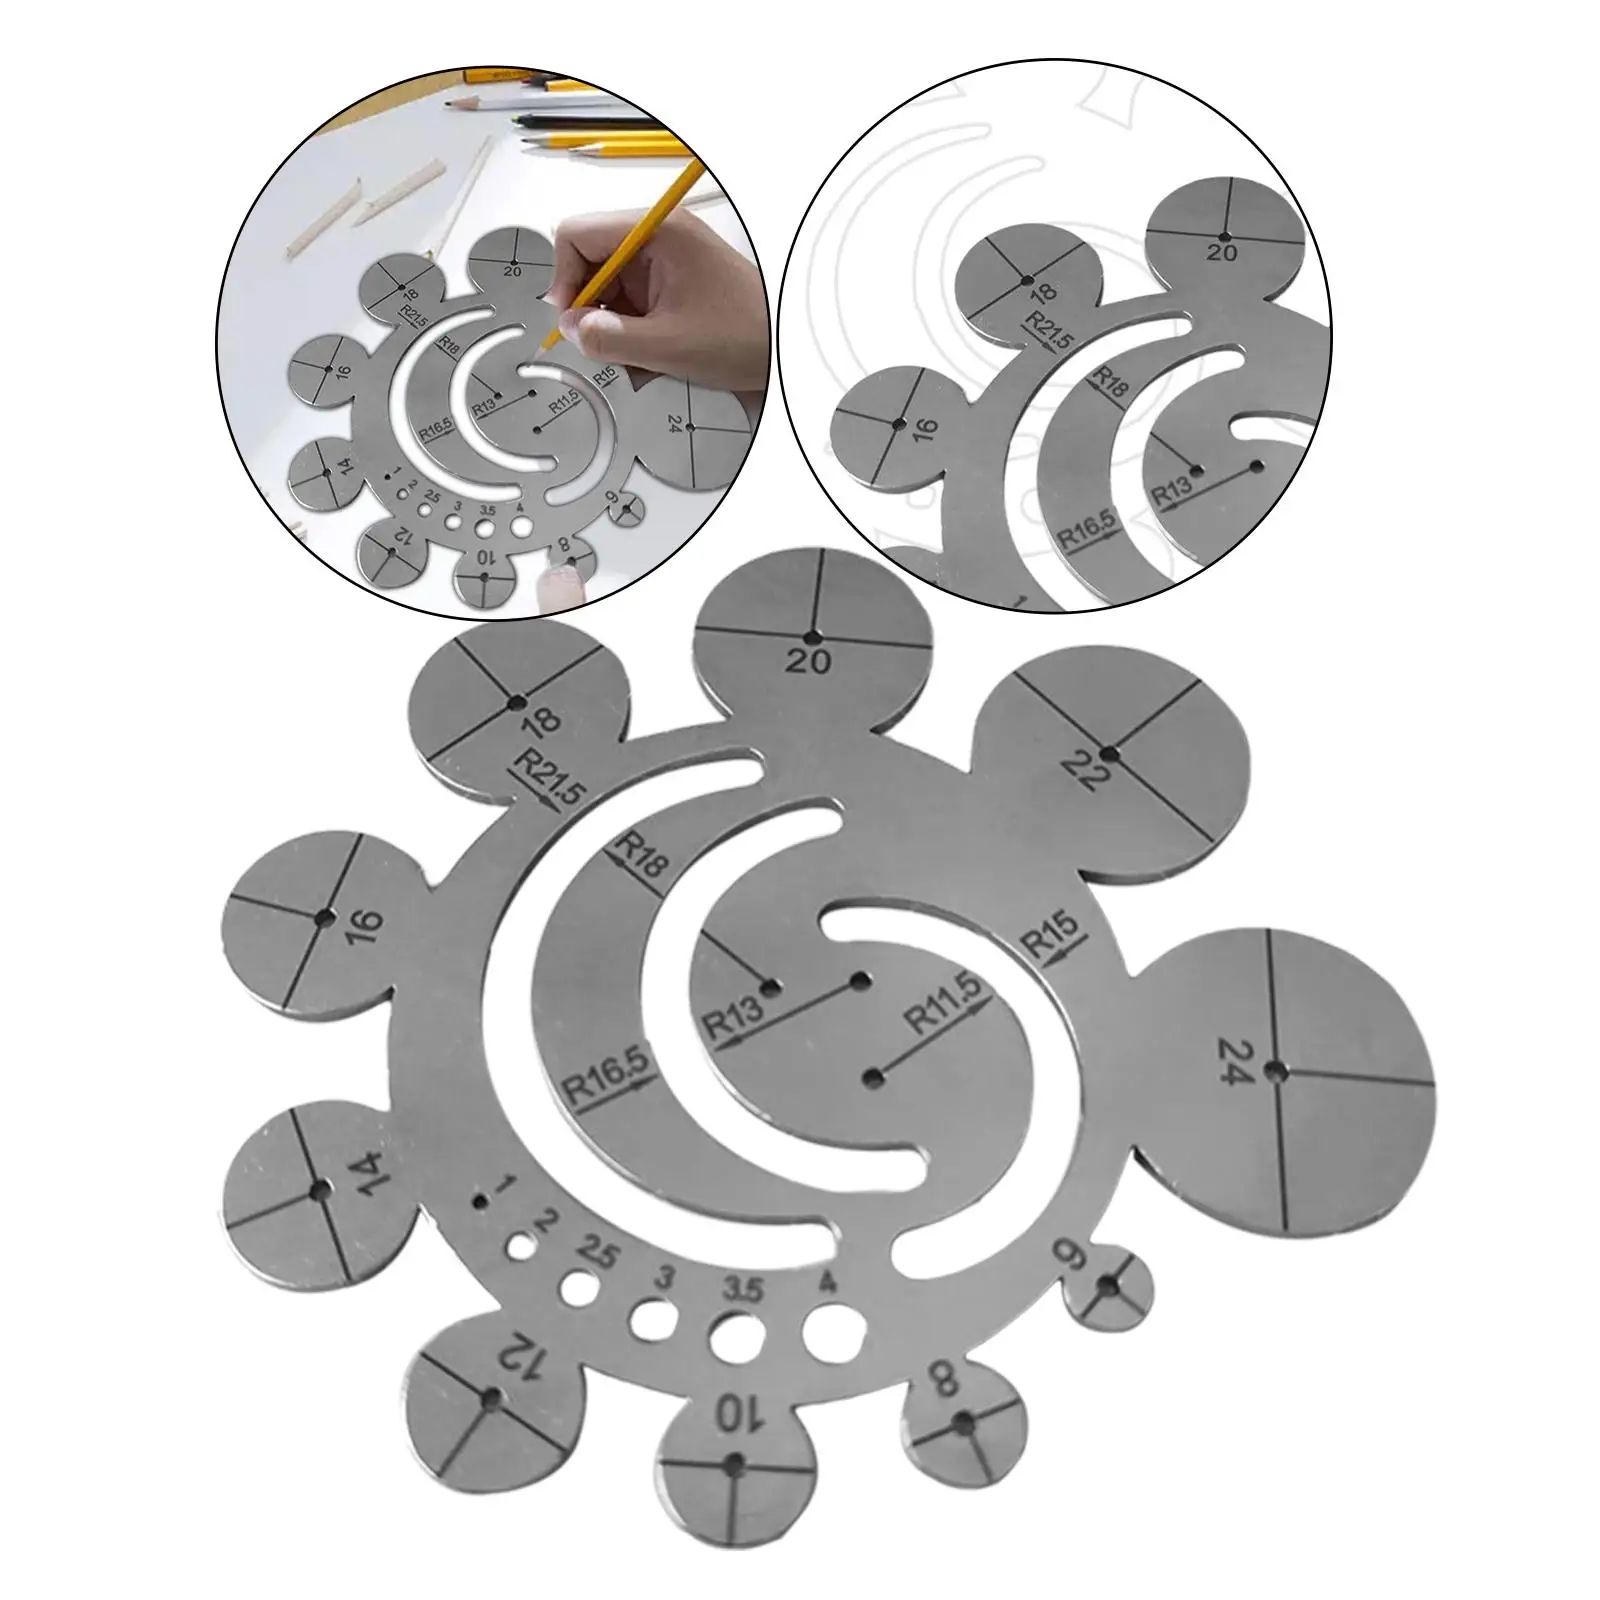 Multifunction Round Corner Cutting Ruler Tailor Leather Circle Cutter Stainless Steel Leather Working Tools for Craft DIY Sewing